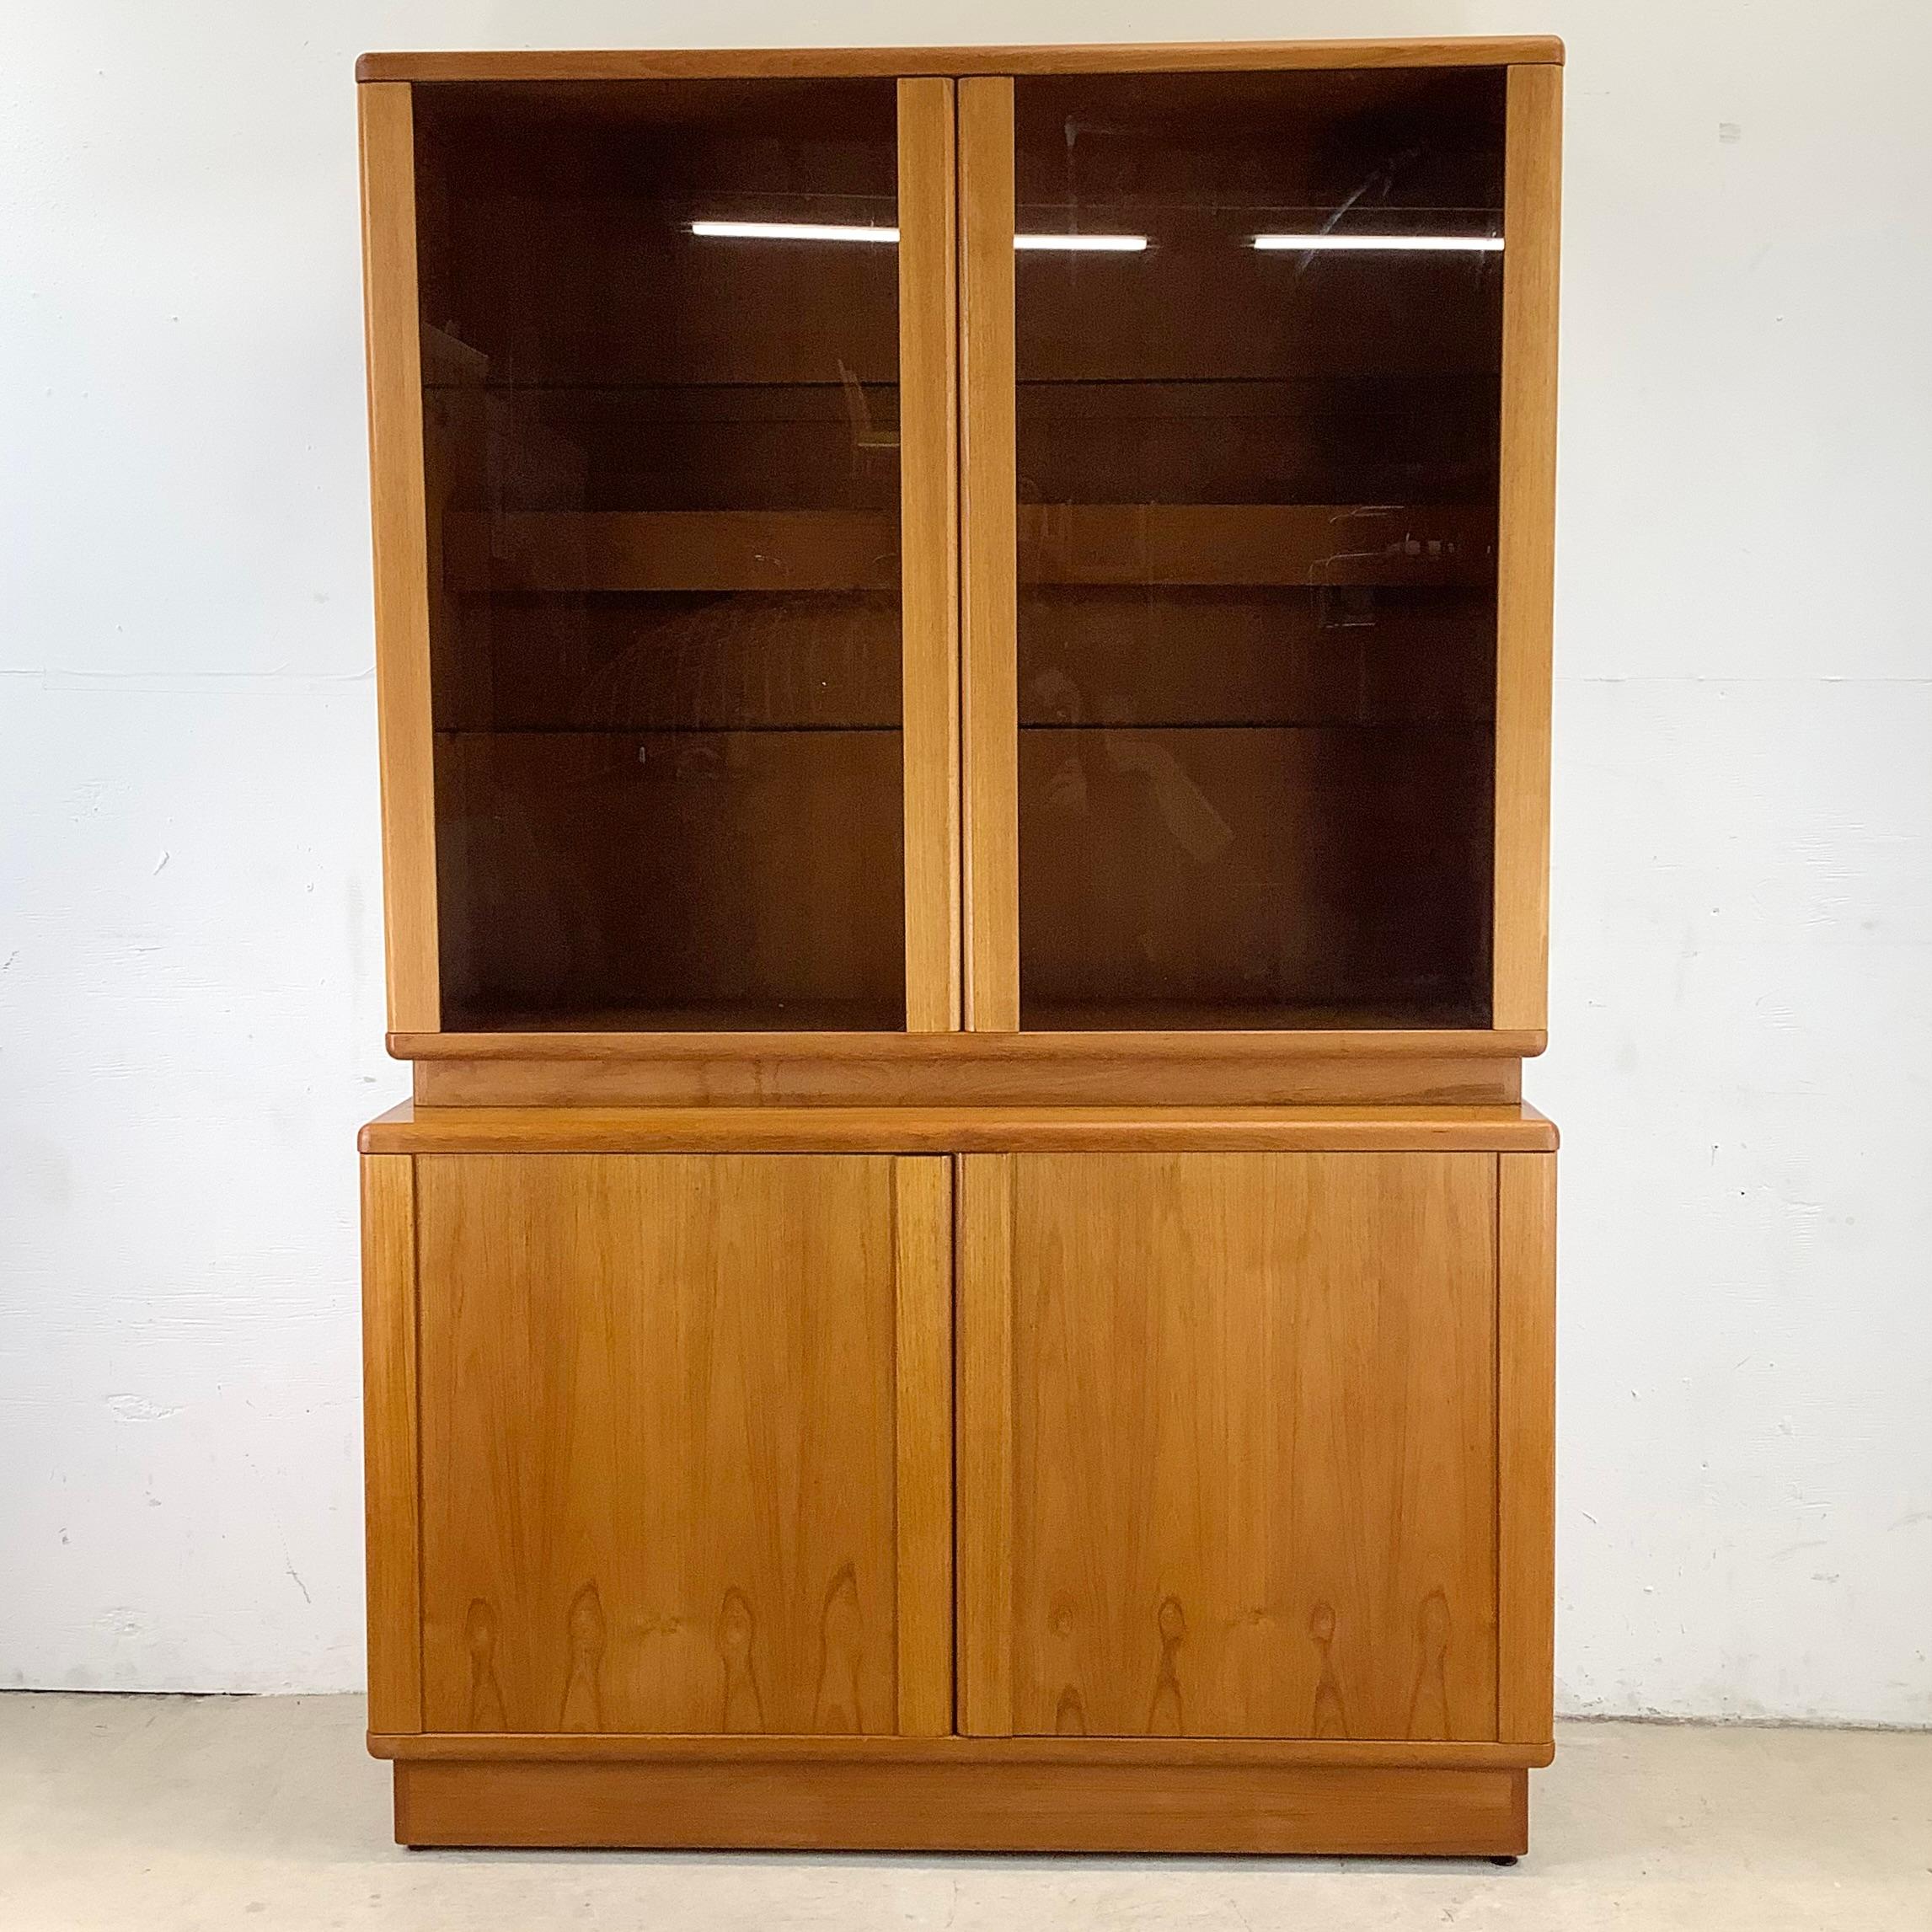 Enhance your home decor with this exquisite late 20th-century vintage two-piece teak display cabinet and hutch. This stunning Scandinavian Modern style piece showcases the timeless elegance of teak wood, known for its warm tones and rich grain